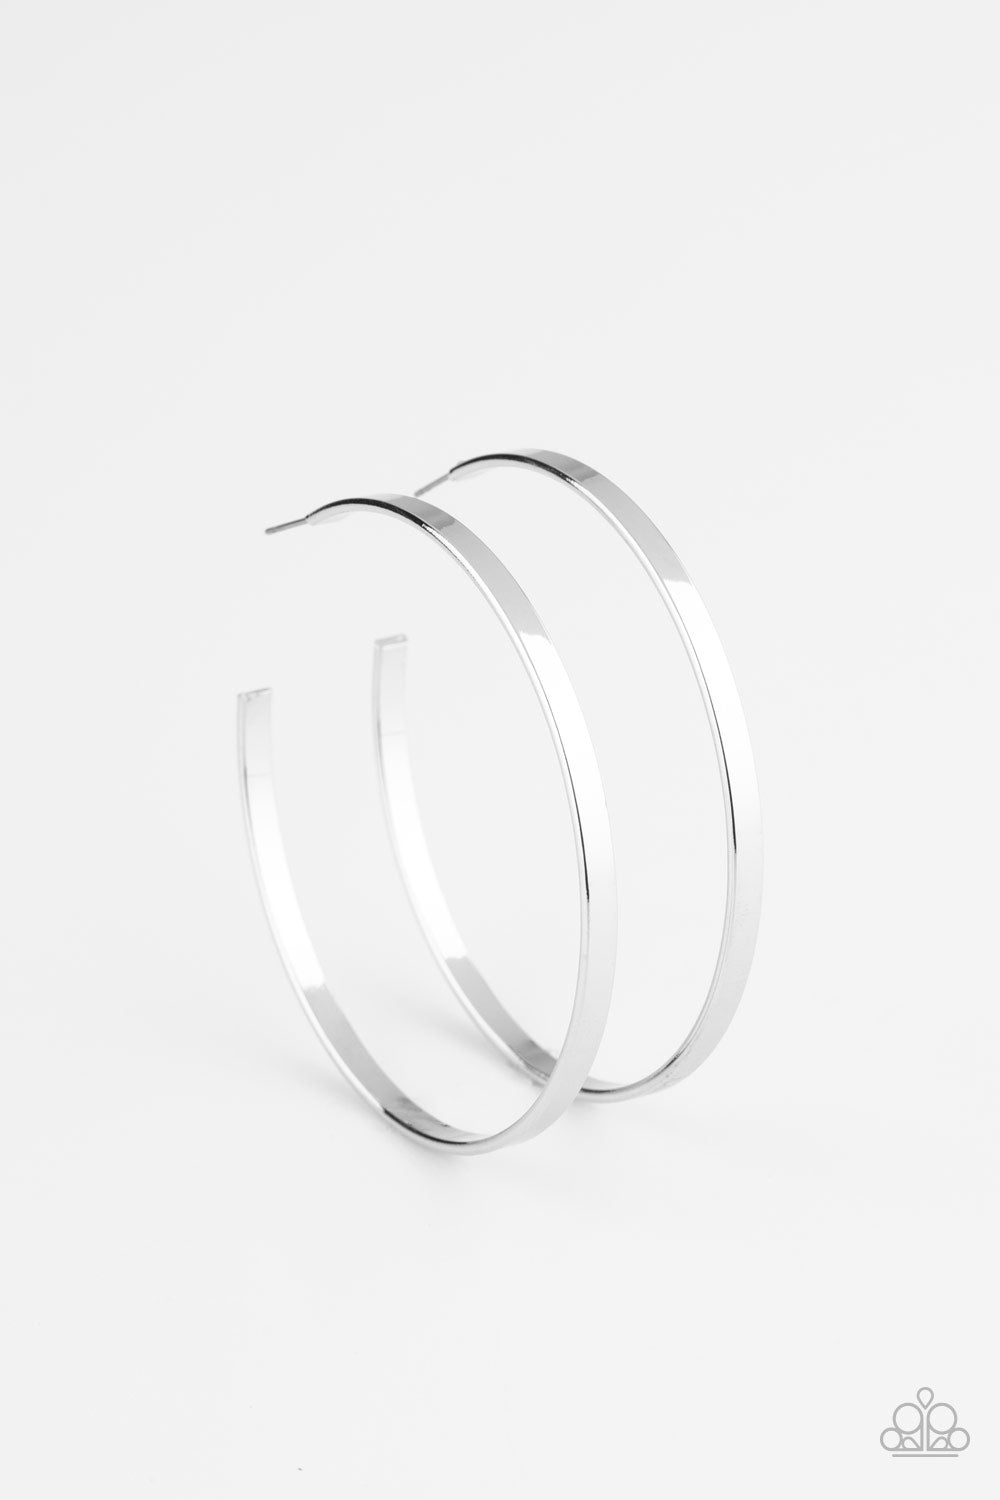 Lean Into The Curves - Paparazzi - Silver Flat Hoop Earrings